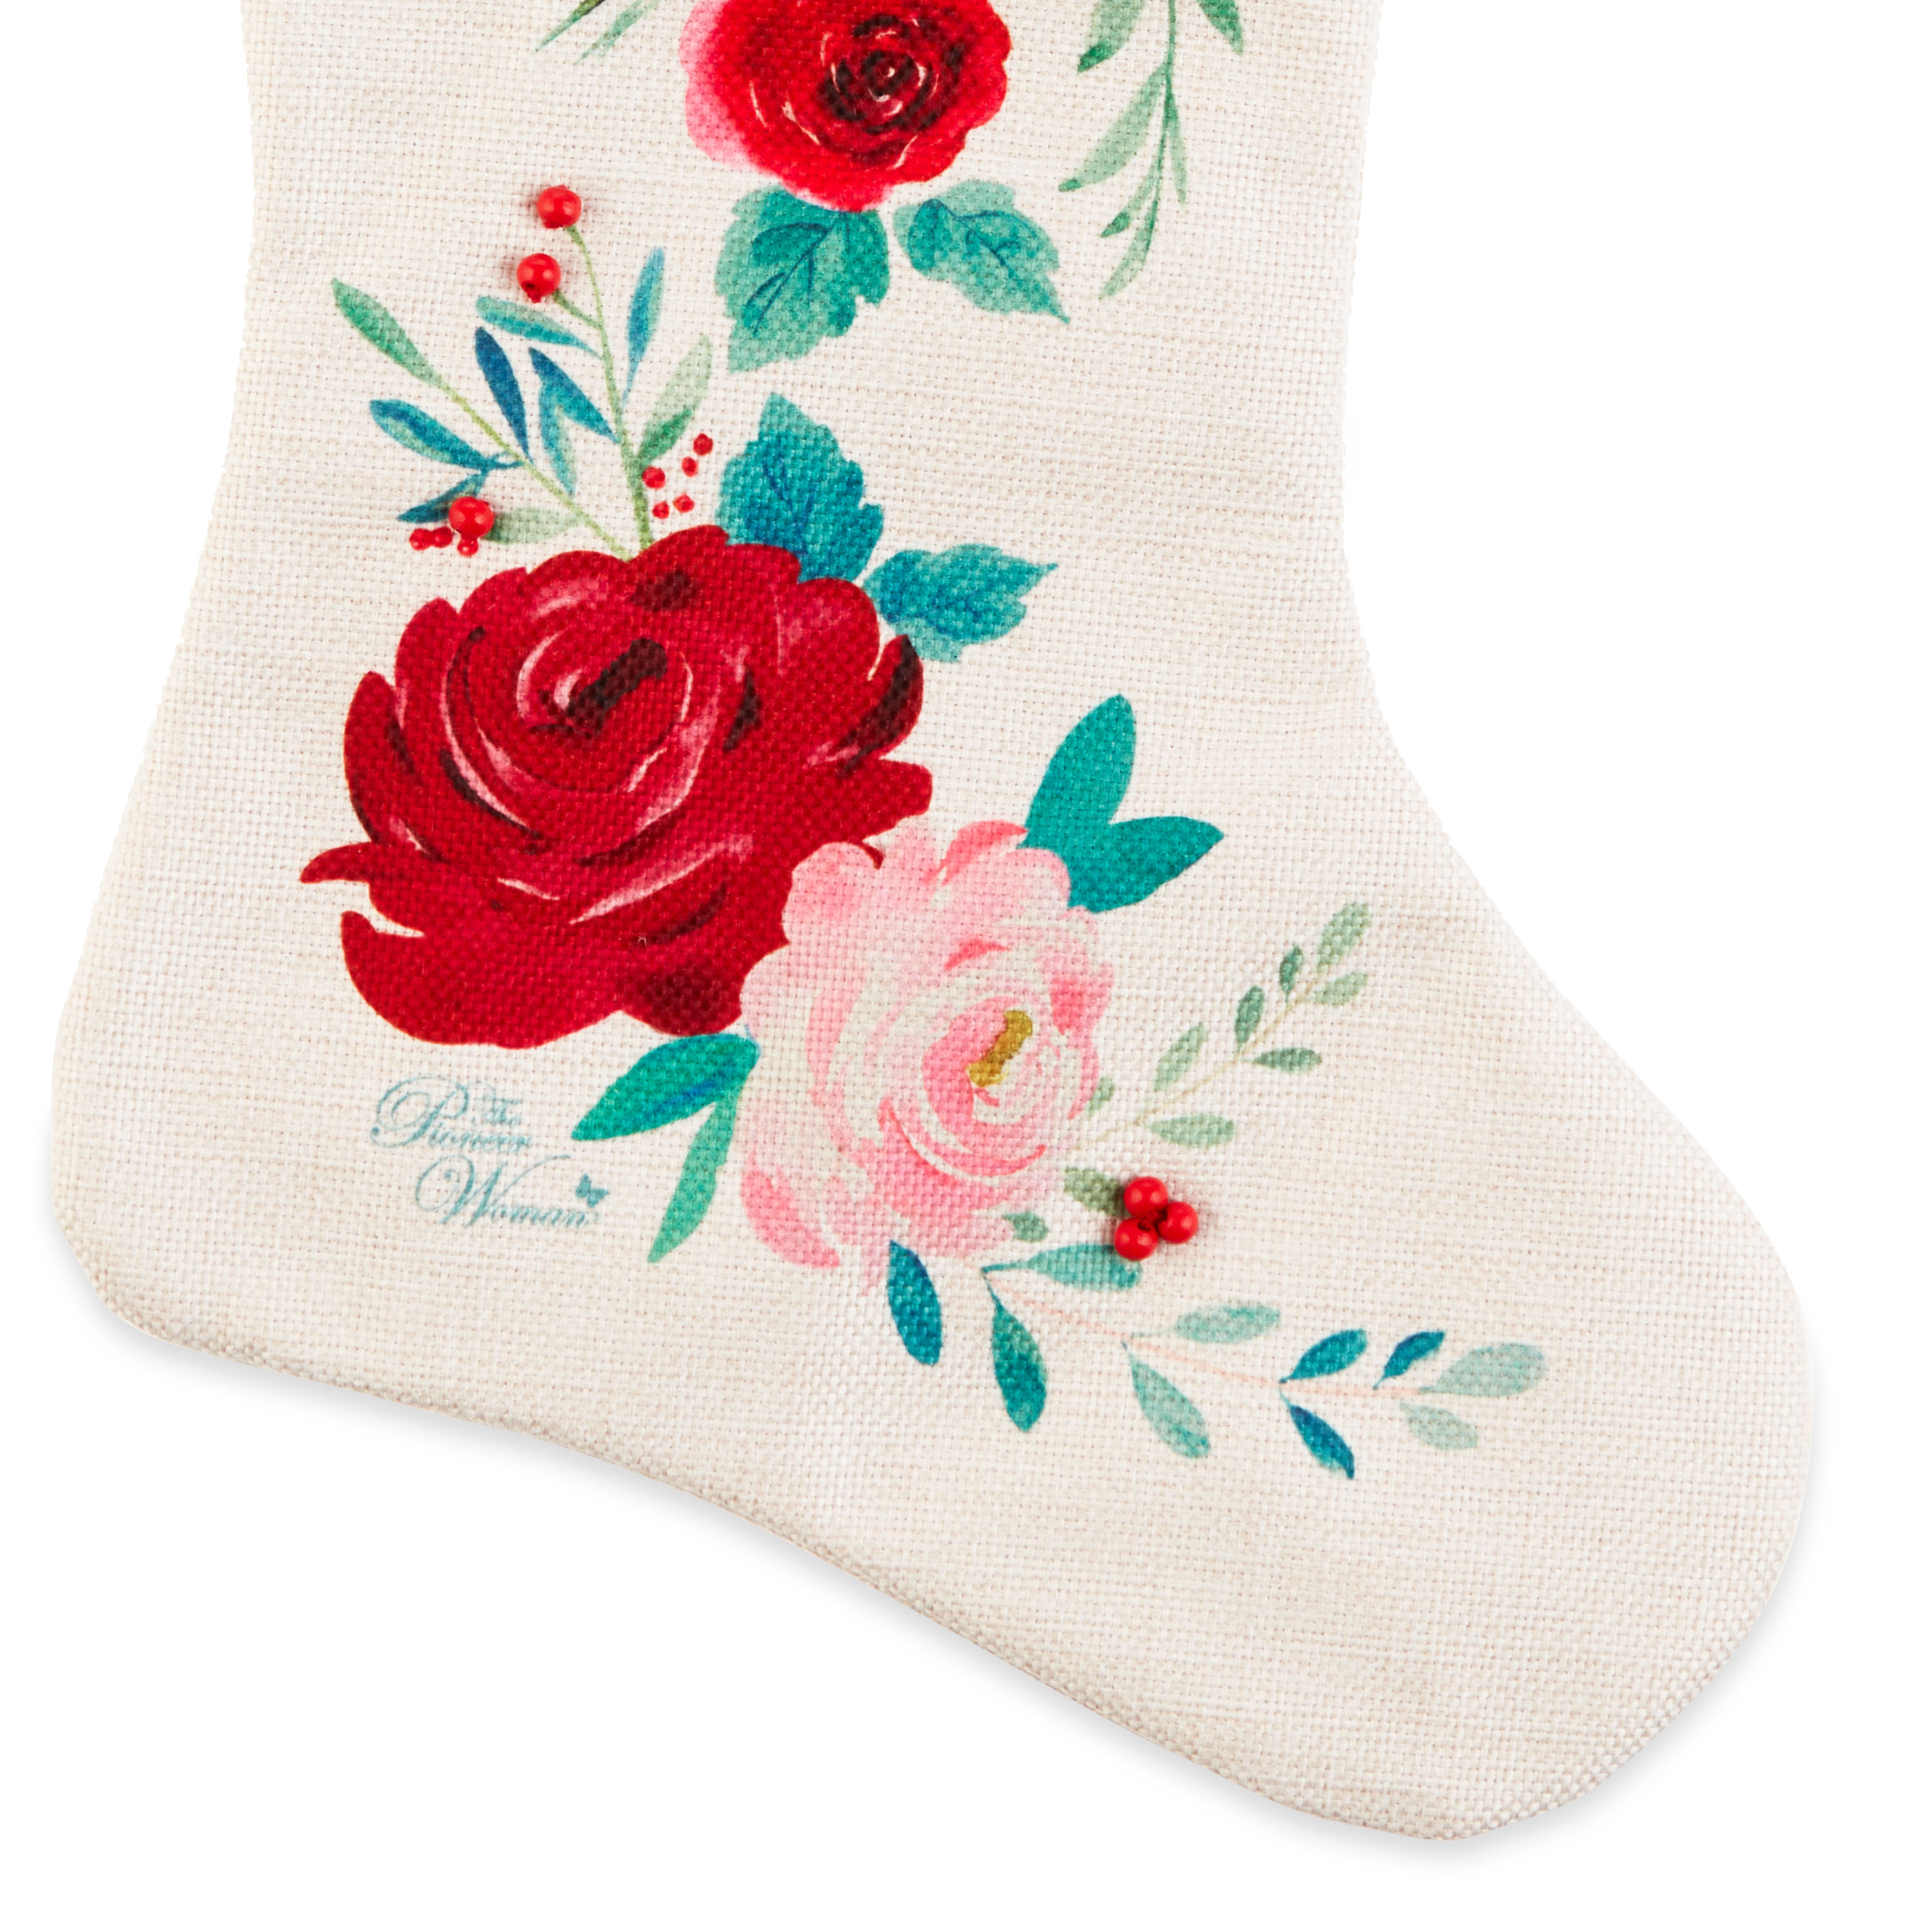 The Pioneer Woman Set of 2 Red Roses Ruffle Christmas Stockings, 20" - image 4 of 9